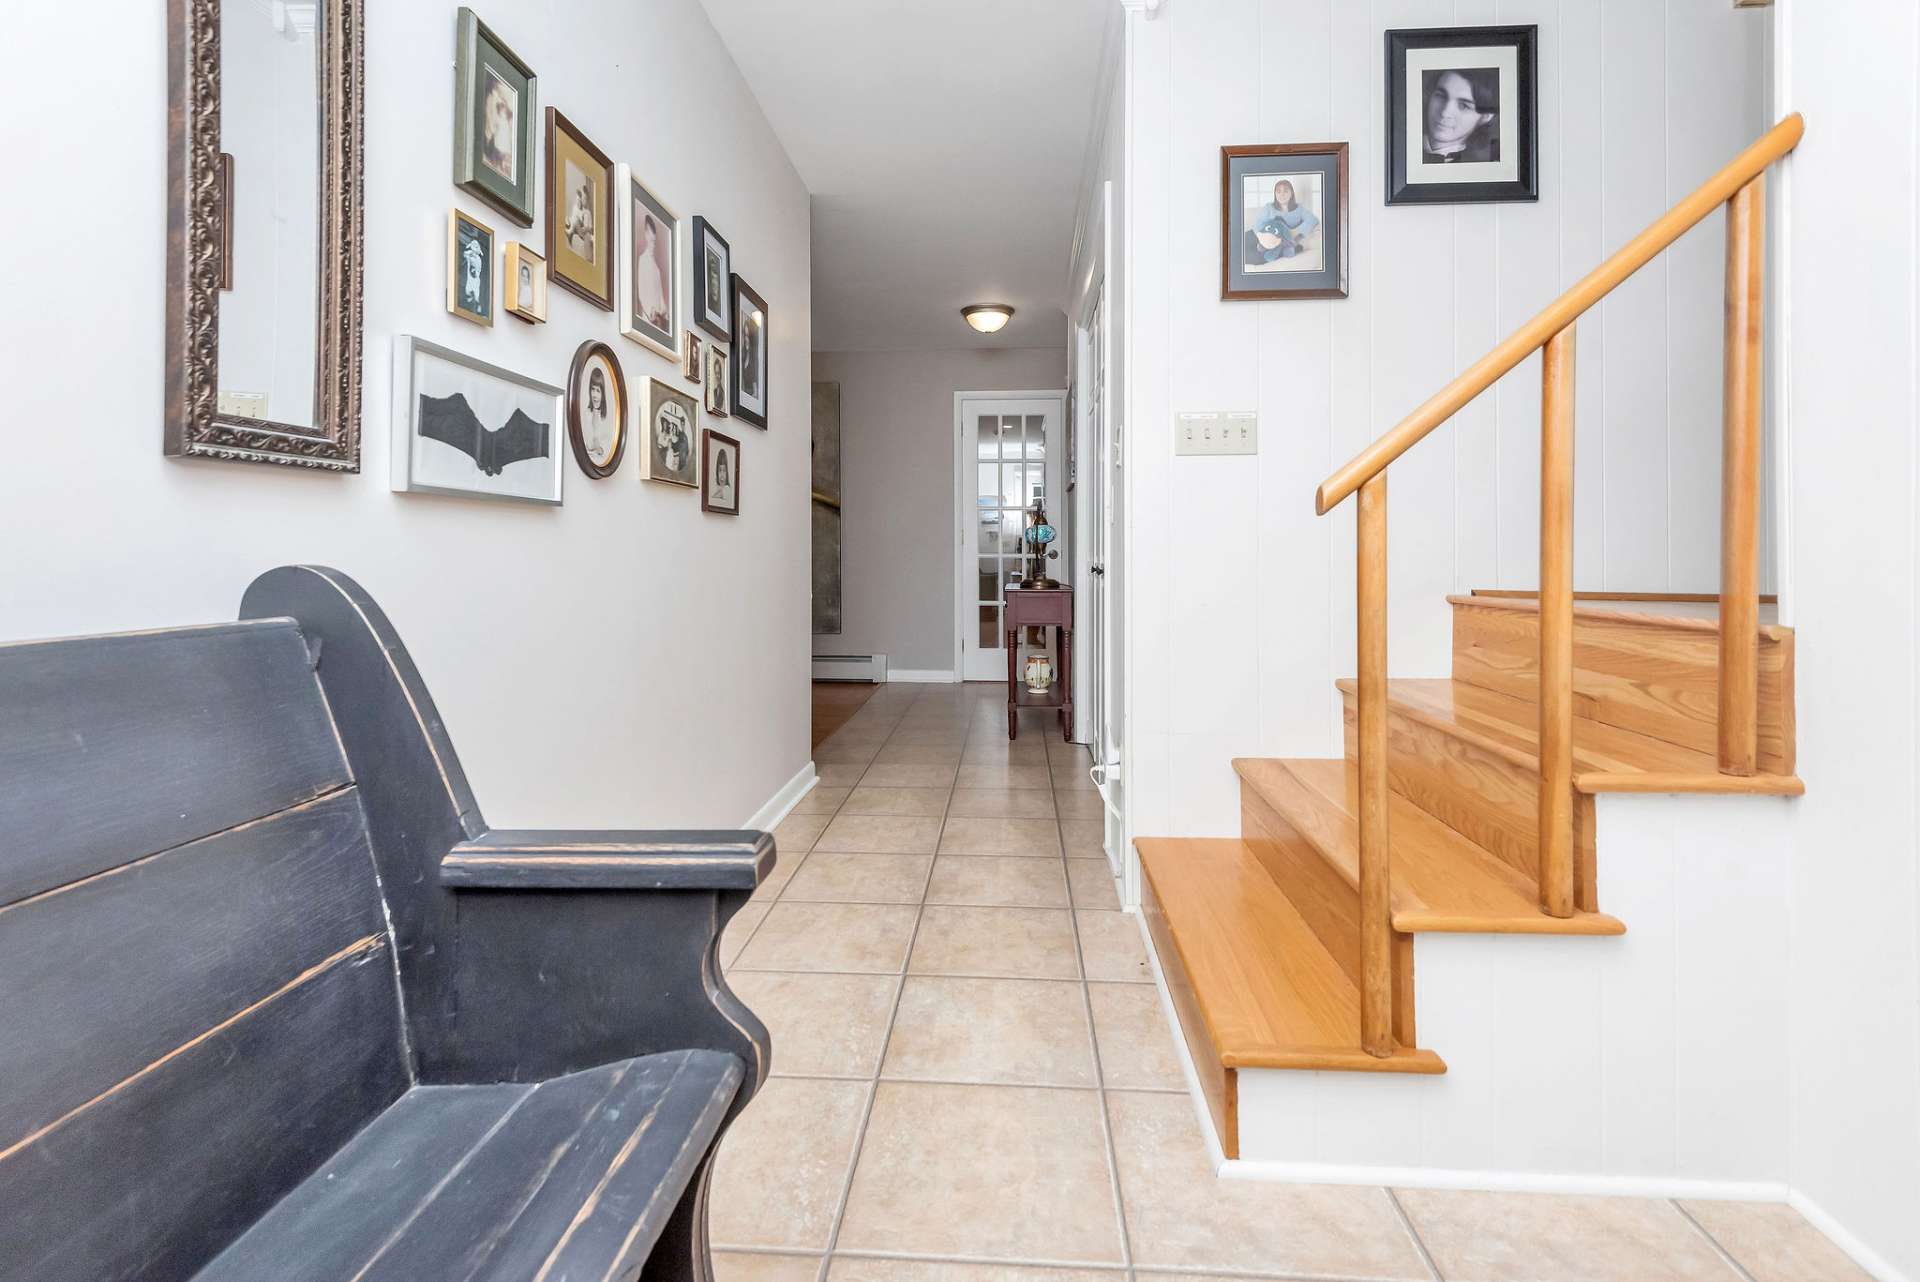 A foyer welcomes you and guests to enjoy the comforts and amenities this home has to offer.